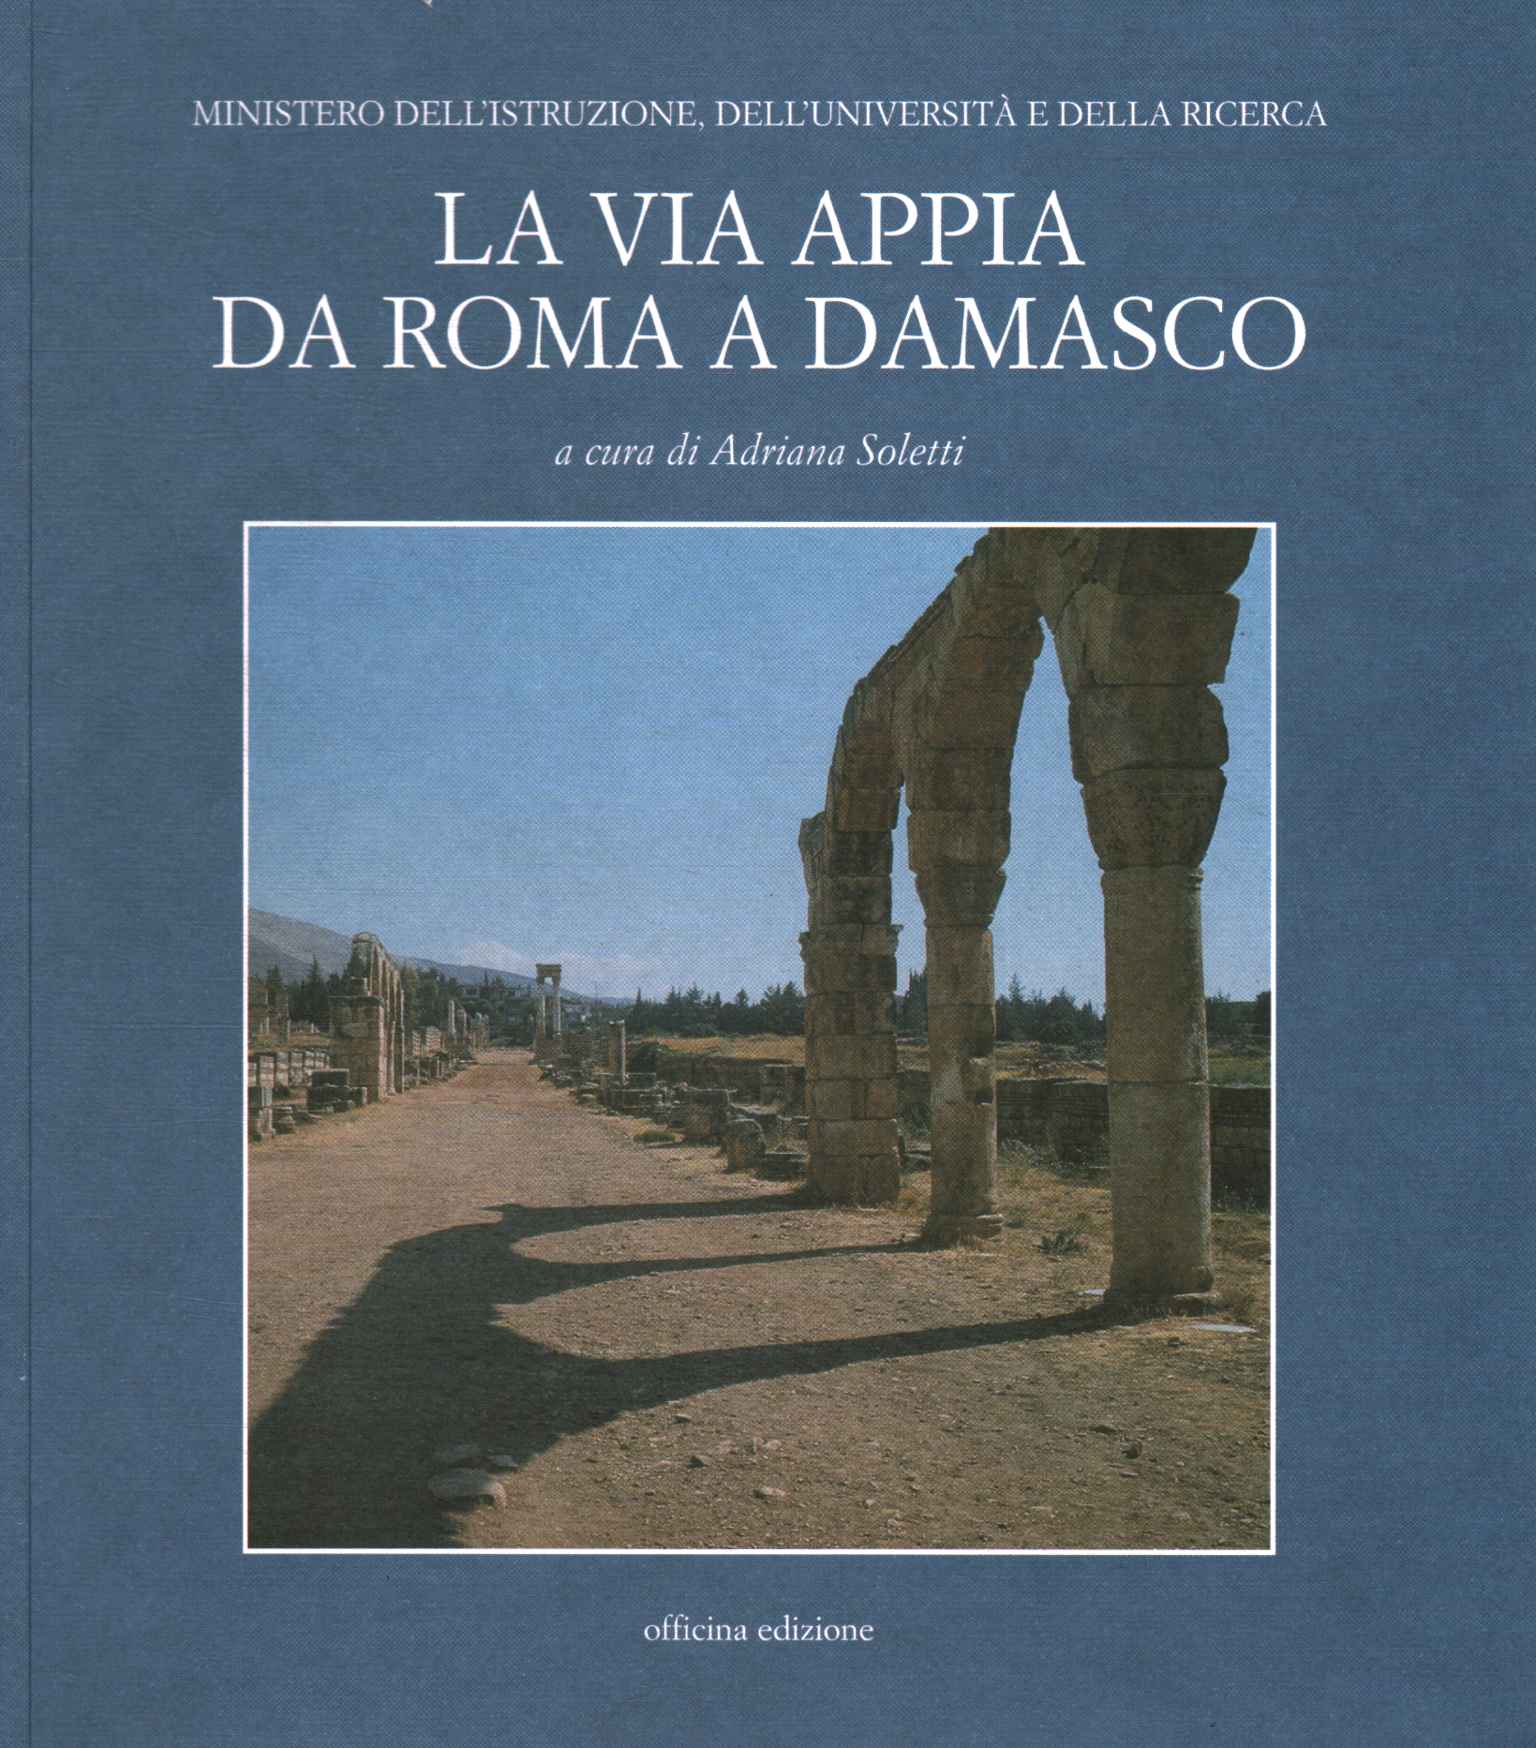 The Appian Way from Rome to Damascus